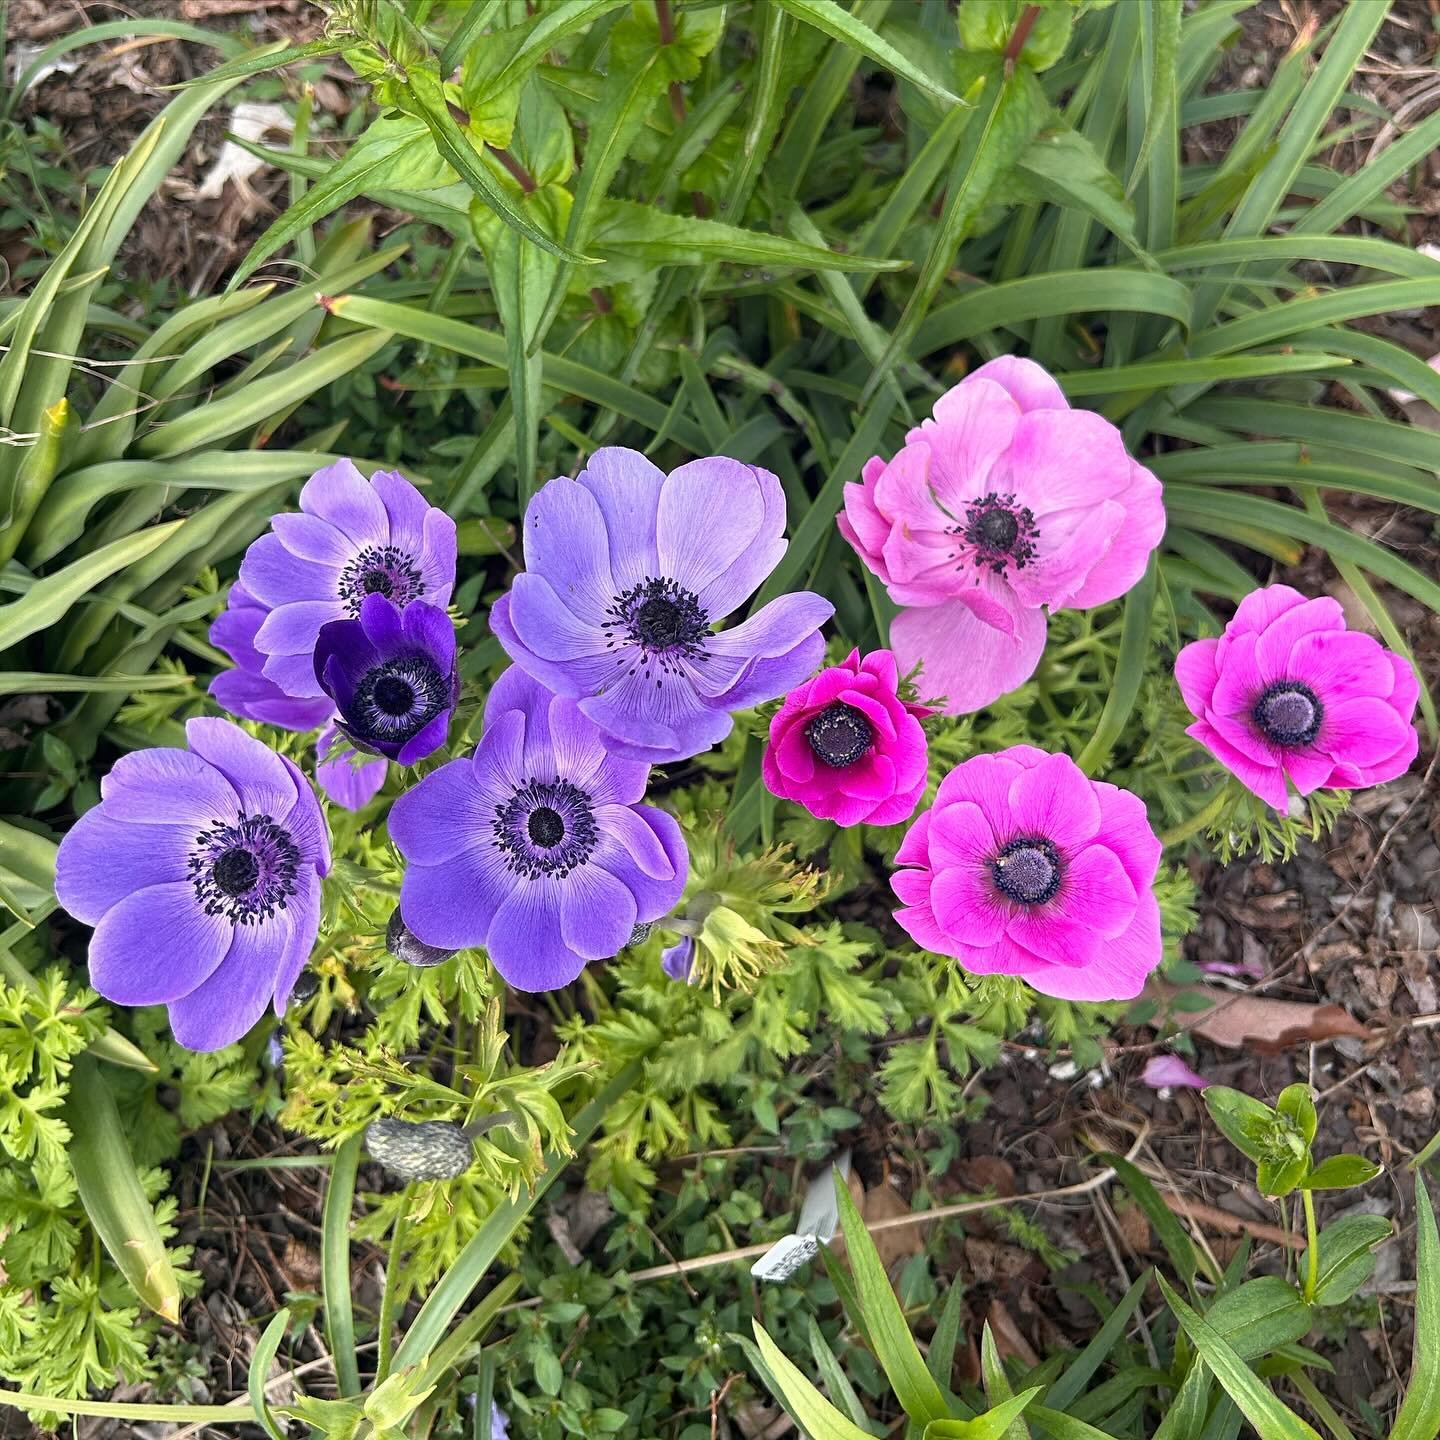 beauties I found at the arboretum today 🤩

#raleigh #raleighnc #arboretum #jcraulstonarboretum #springflowers